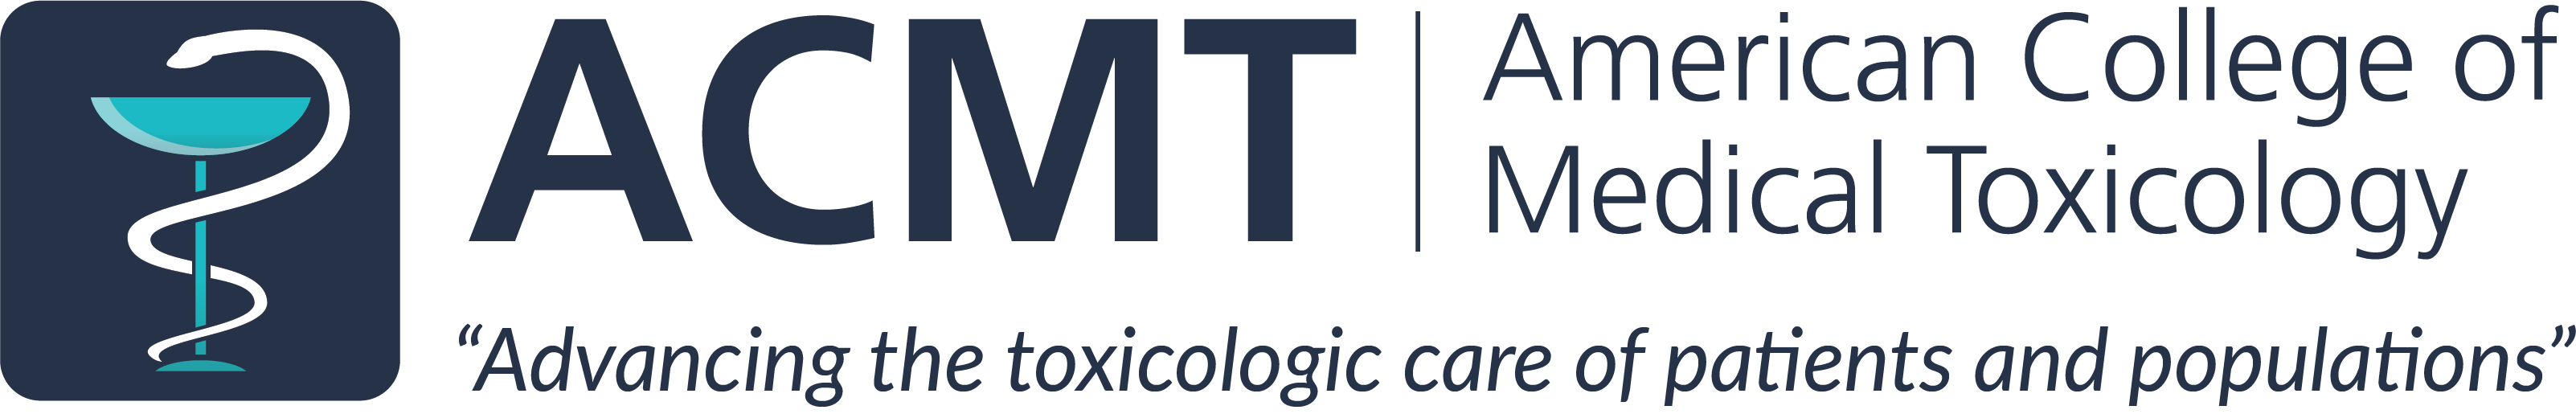 American College of Medical Toxicology